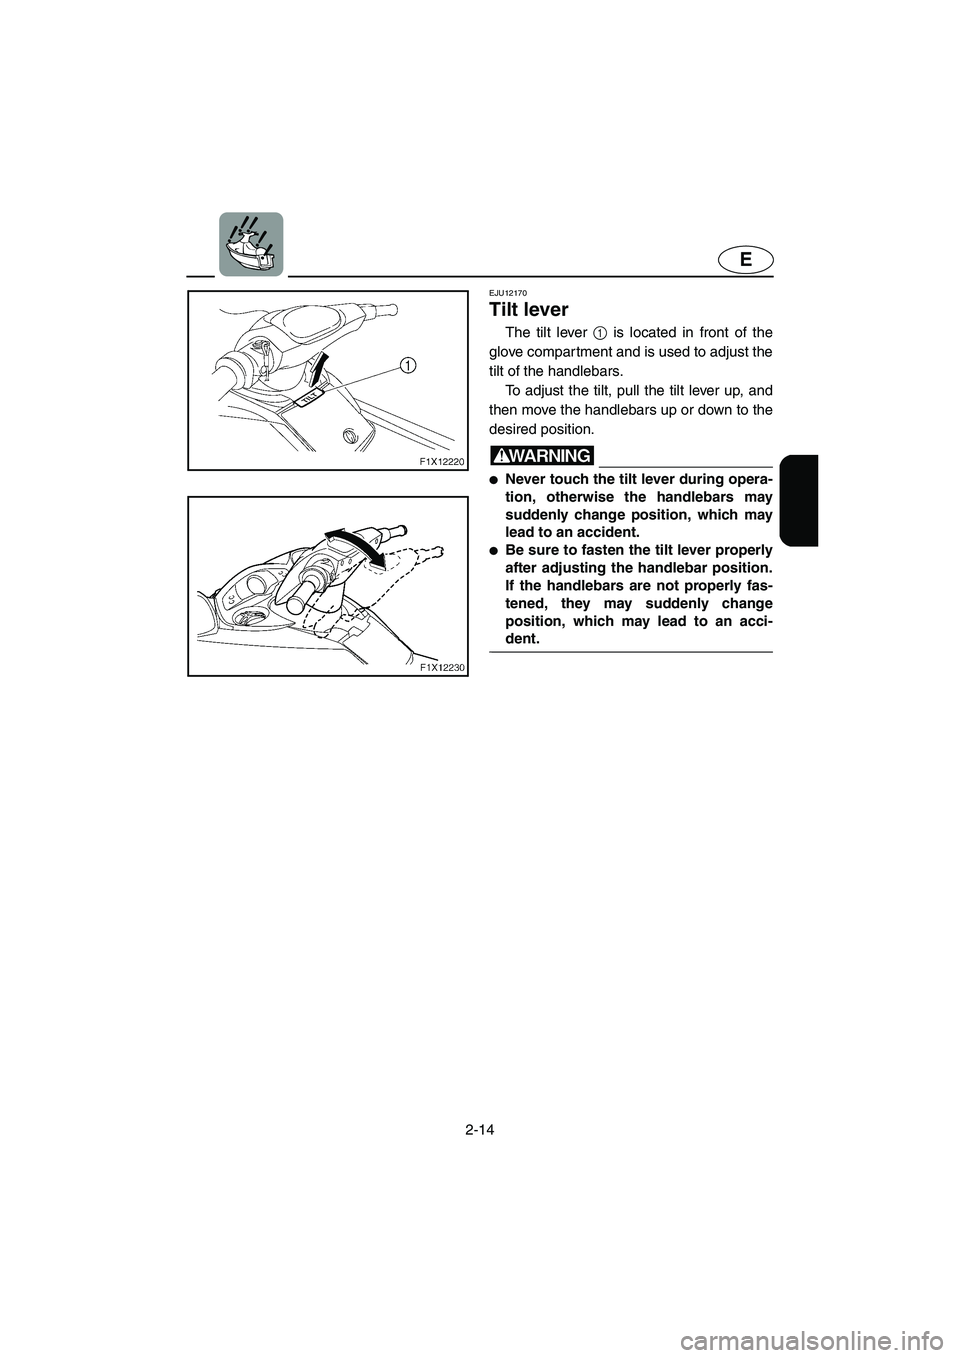 YAMAHA FX HO CRUISER 2006 Service Manual 2-14
E
EJU12170 
Tilt lever  
The tilt lever 1 is located in front of the
glove compartment and is used to adjust the
tilt of the handlebars. 
To adjust the tilt, pull the tilt lever up, and
then move